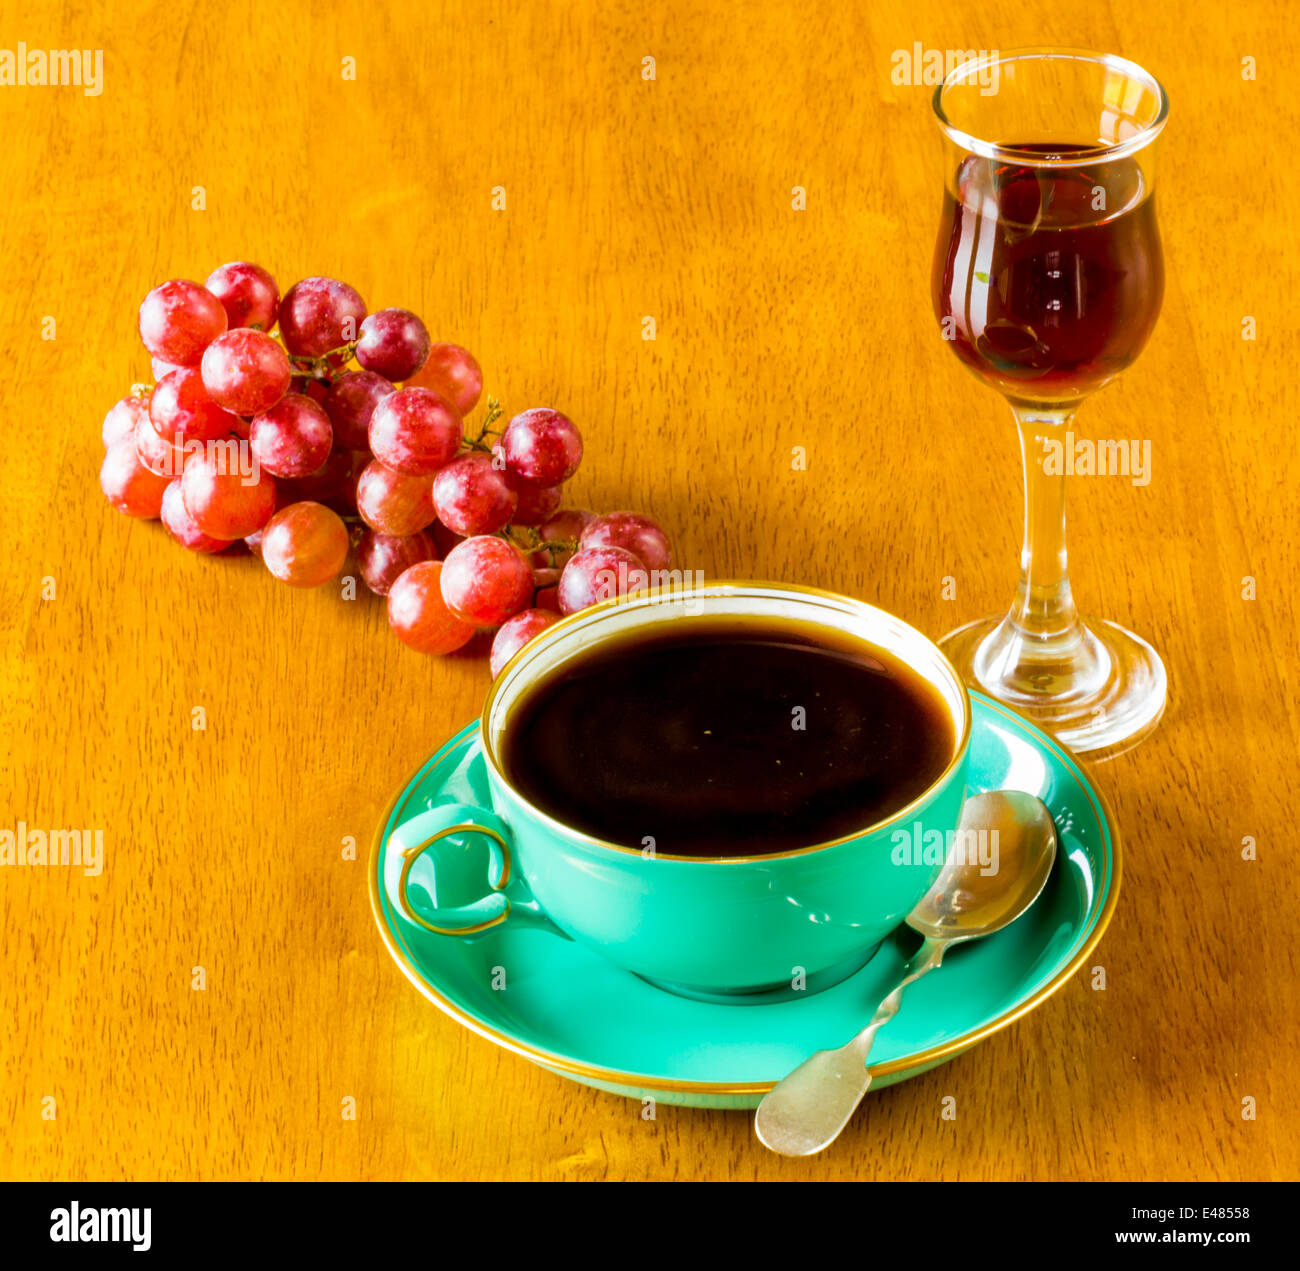 A Cup of strong Black Coffee with a Liqueur and some Grapes Stock Photo